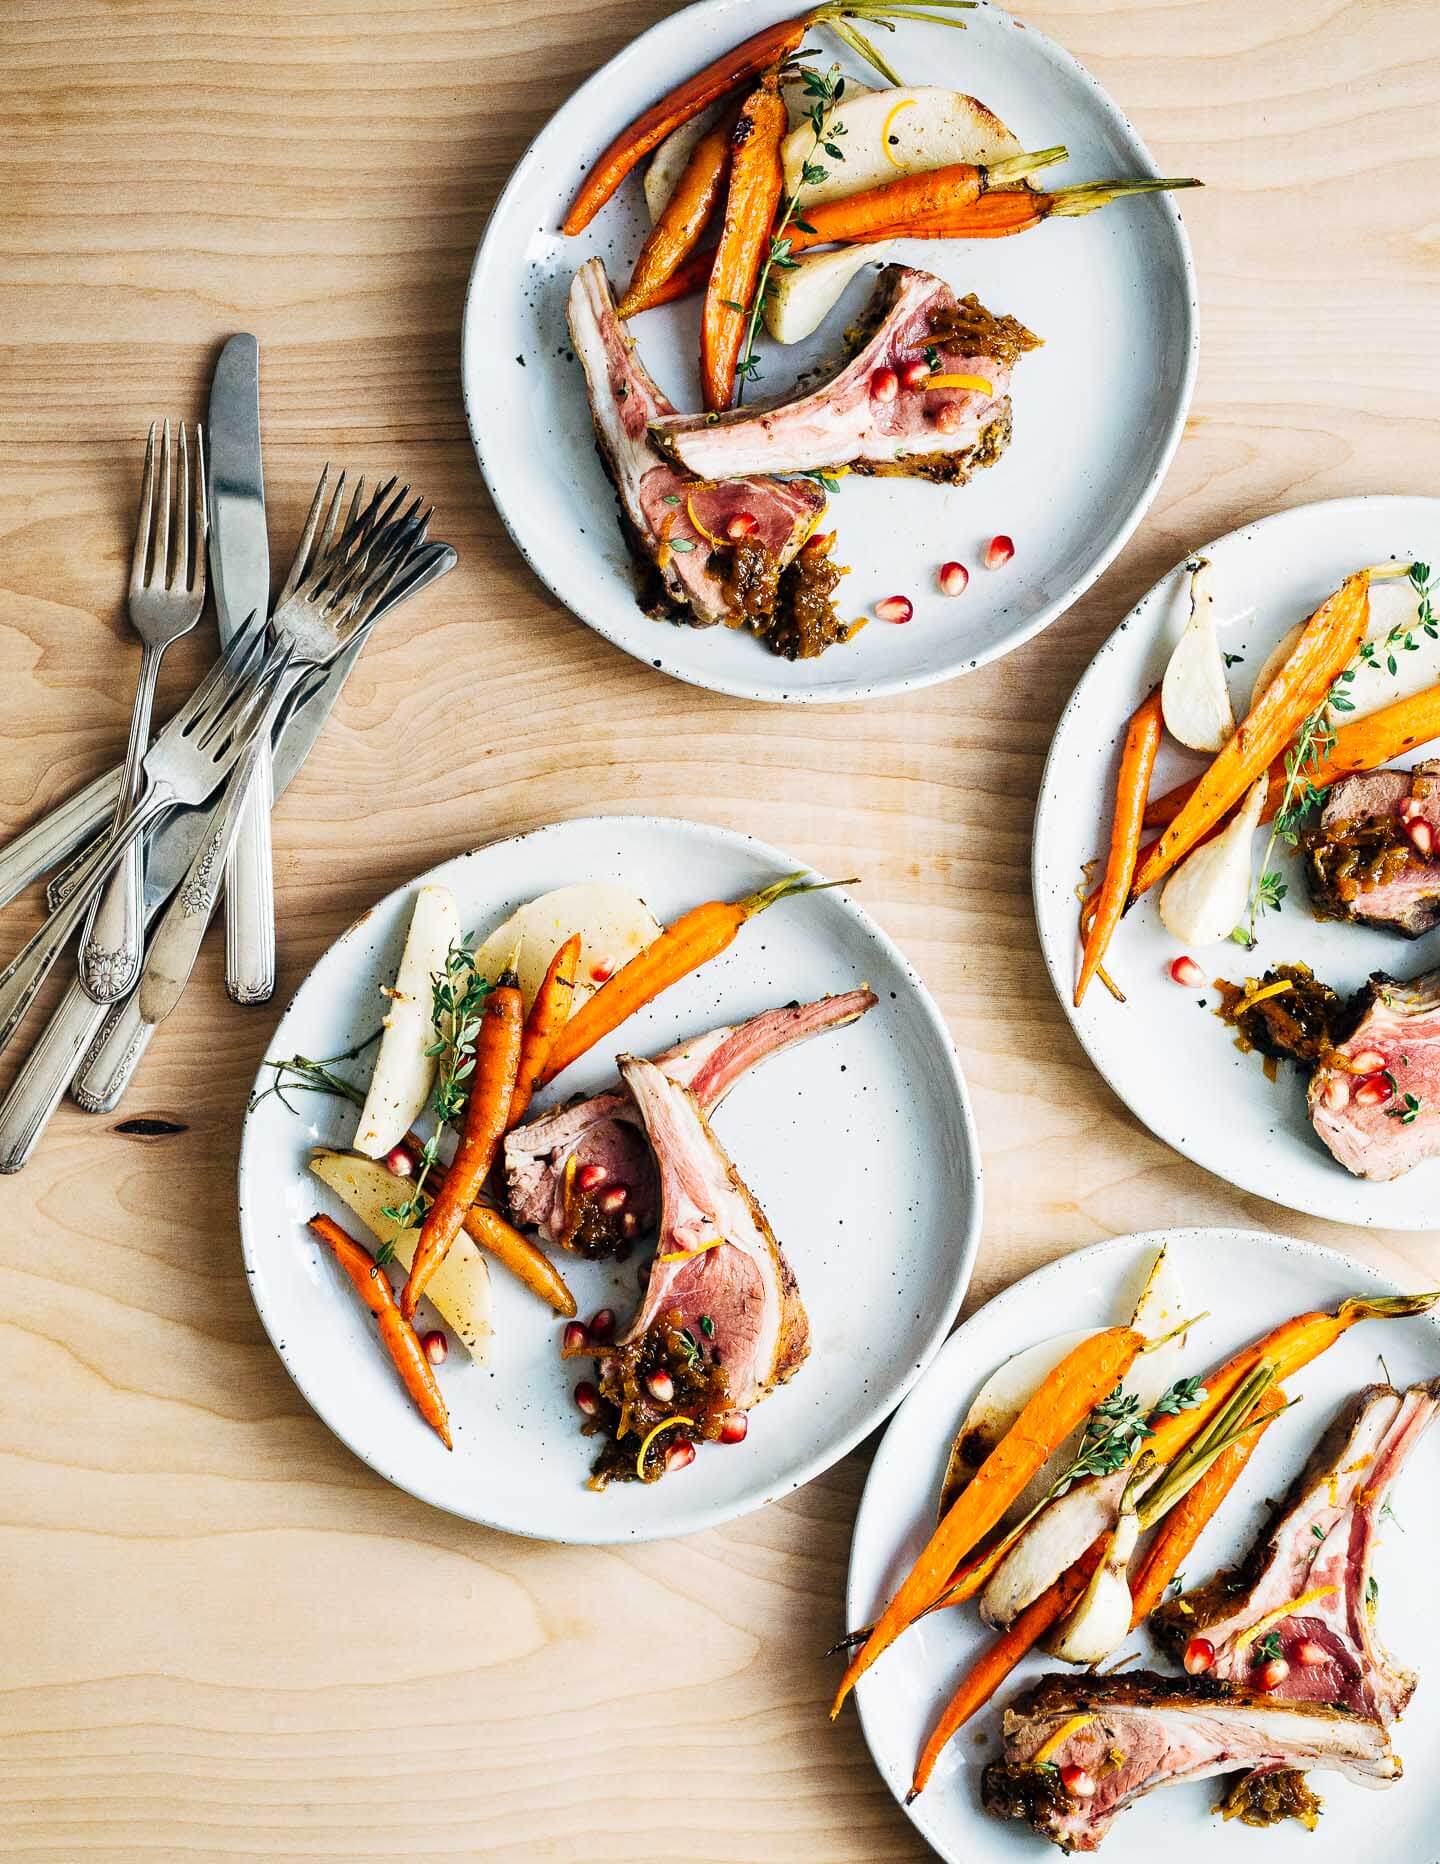 A dinner party-worthy recipe for rack of lamb roasted alongside root vegetables and served with a vibrant honey orange sauce.